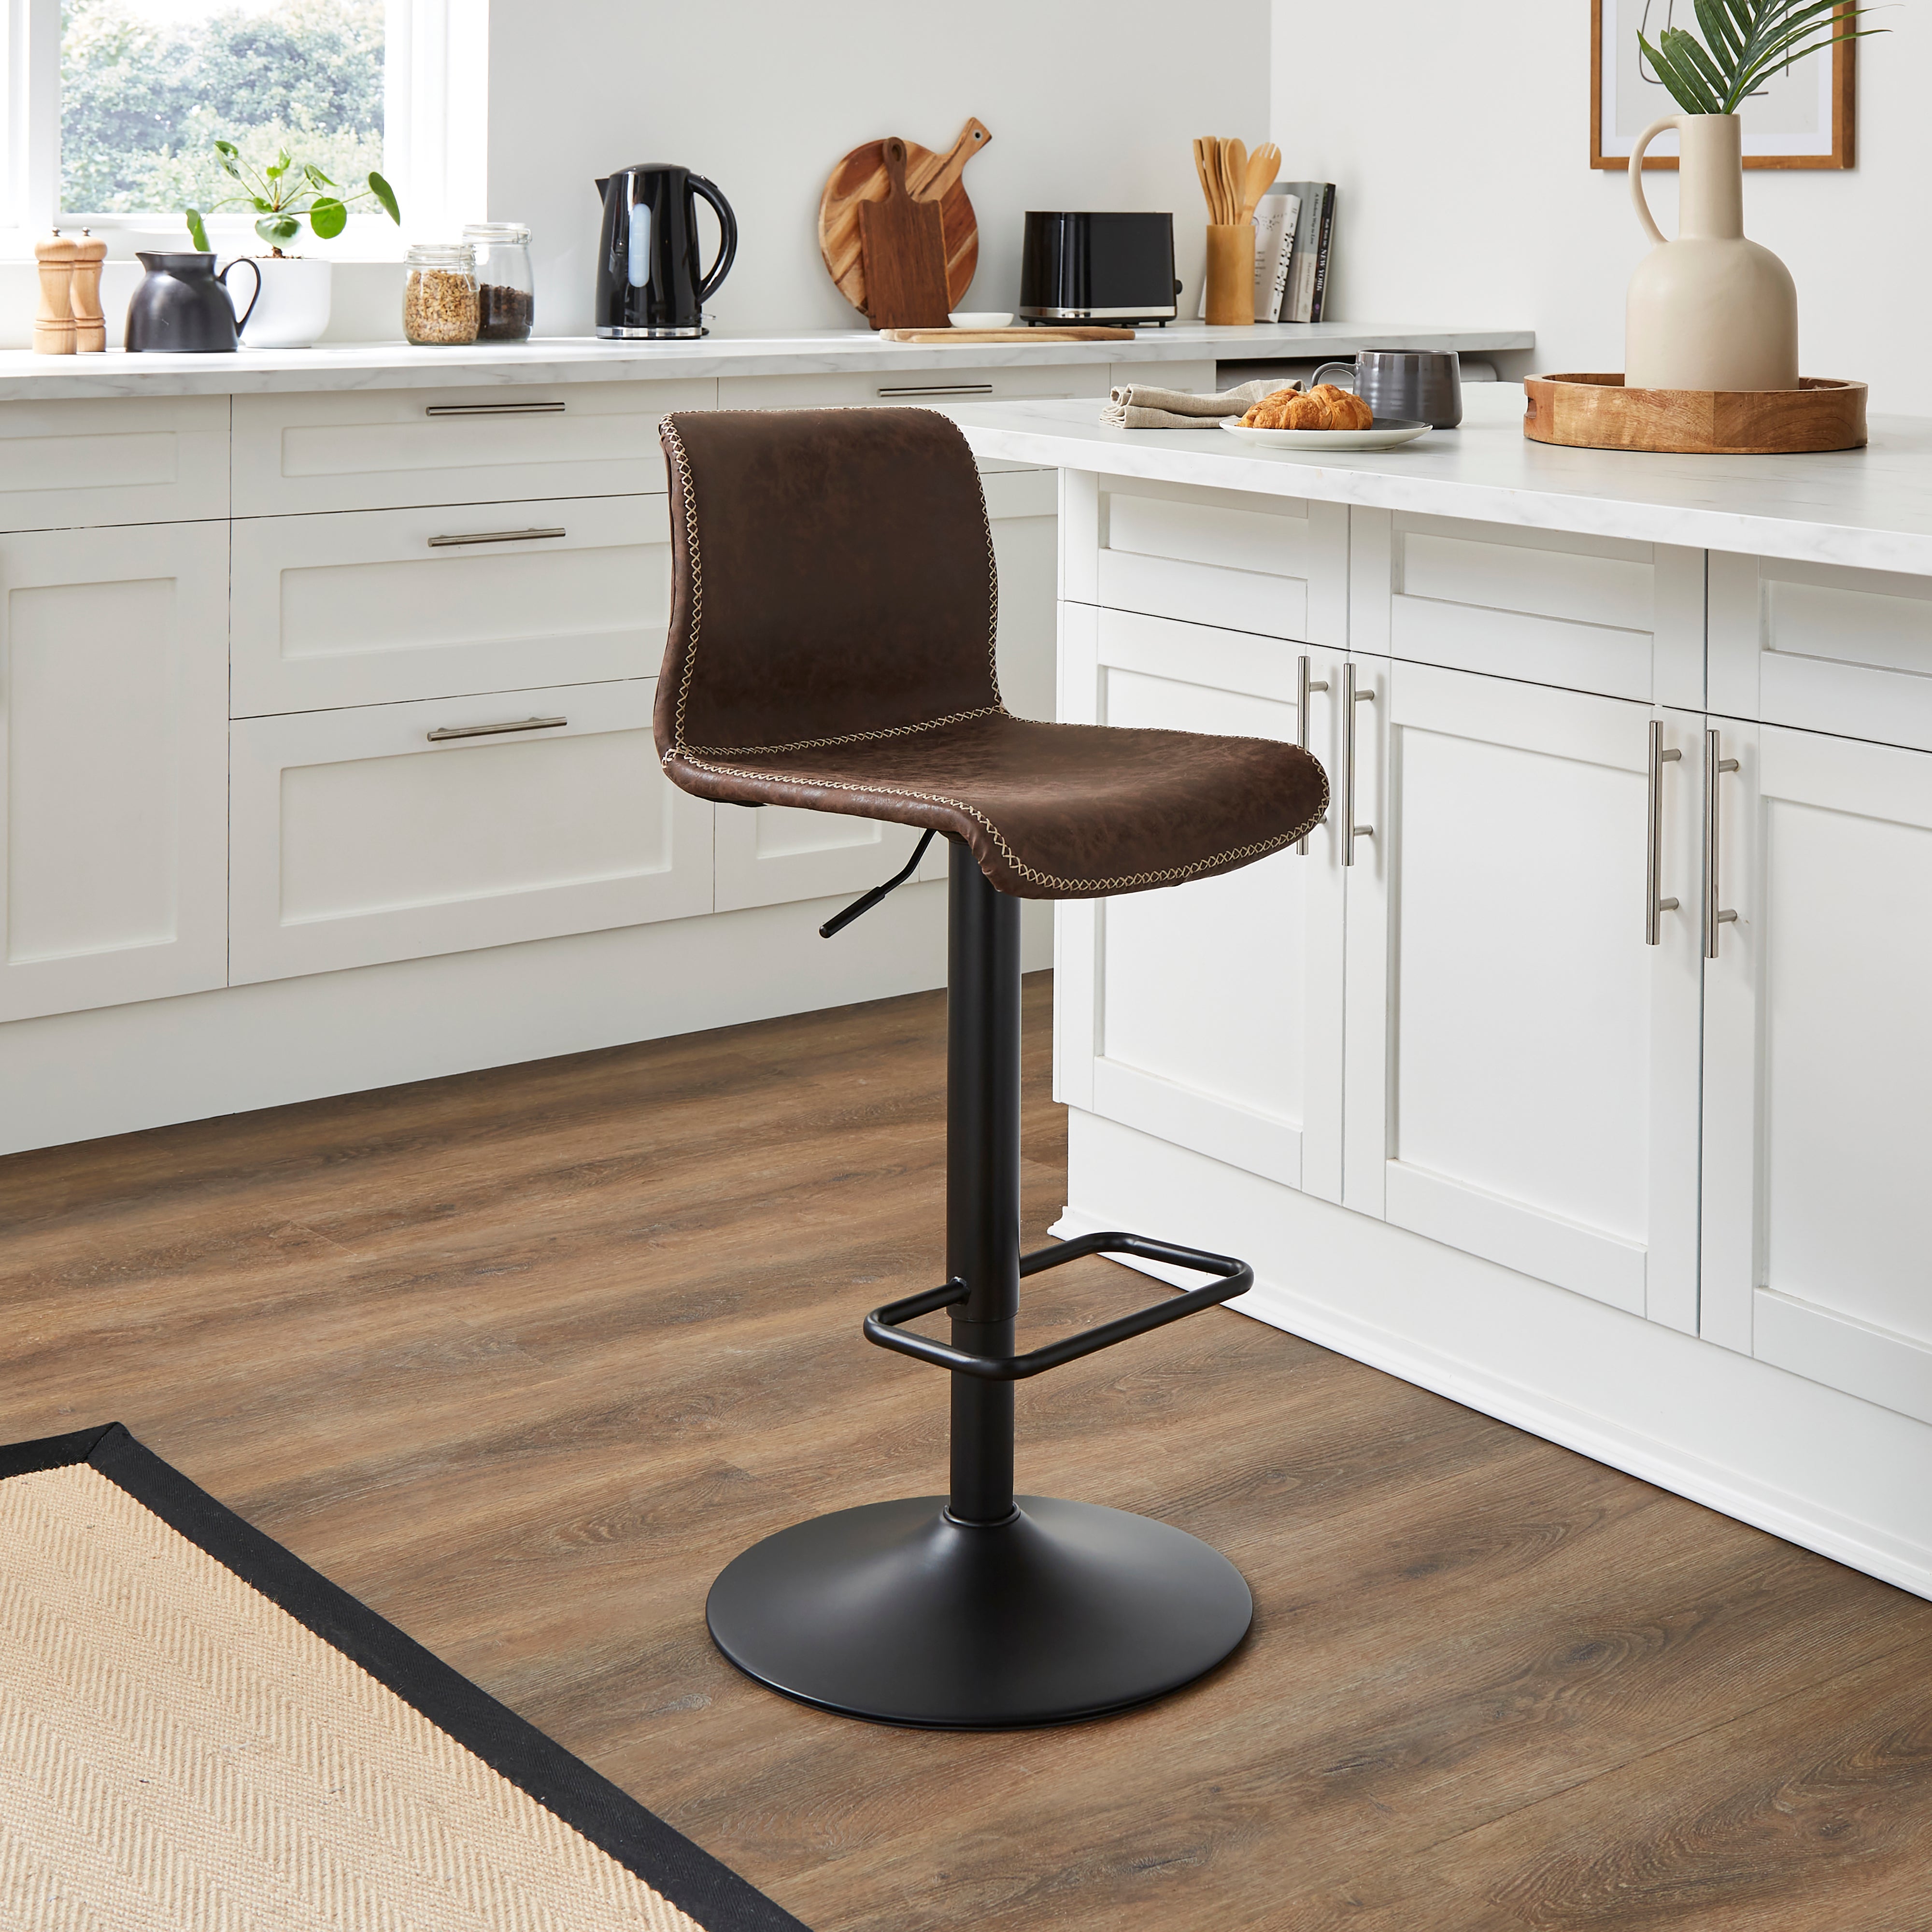 Venice Adjustable Height Swivel Bar Stool Faux Leather Brown